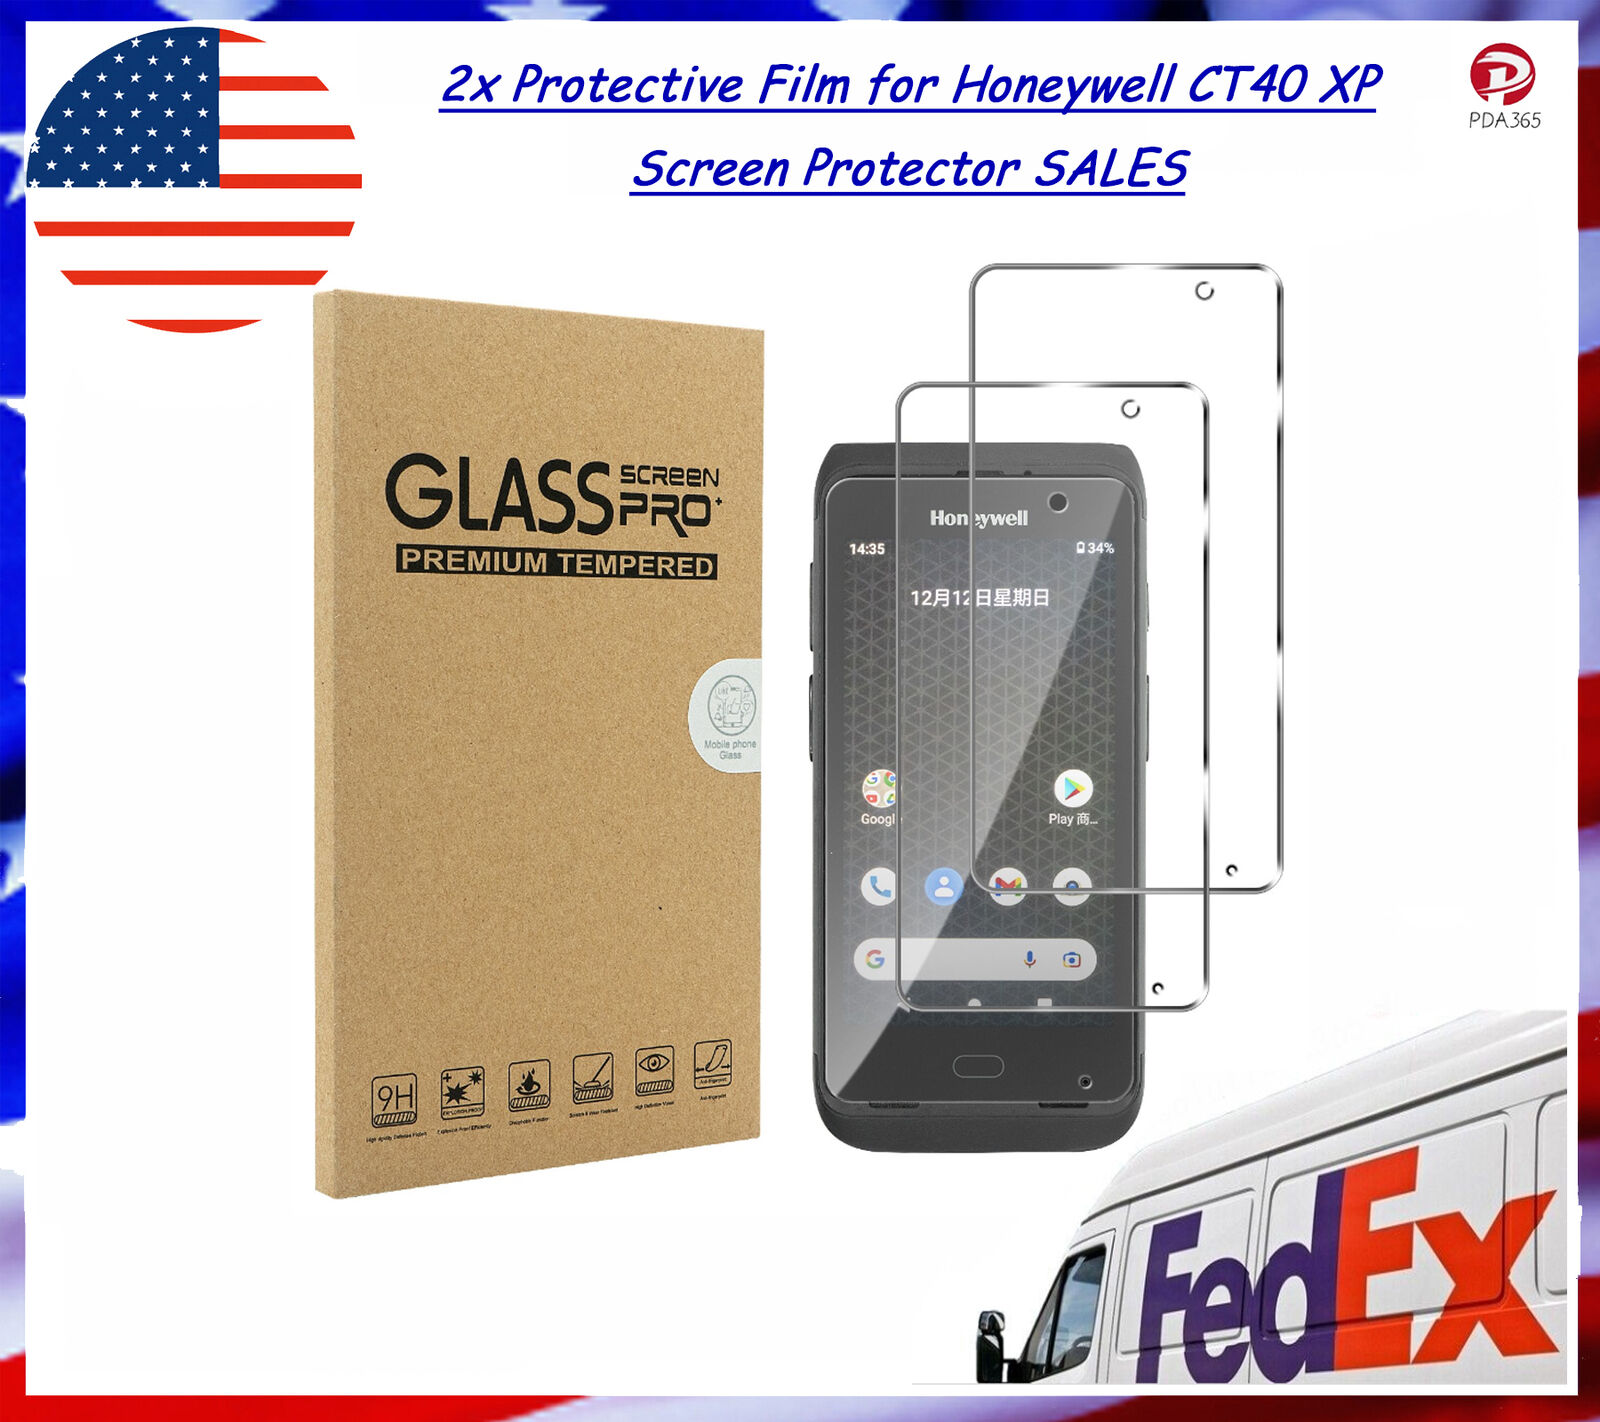 2x Protective Film for Honeywell CT40 XP Screen Protector SALES